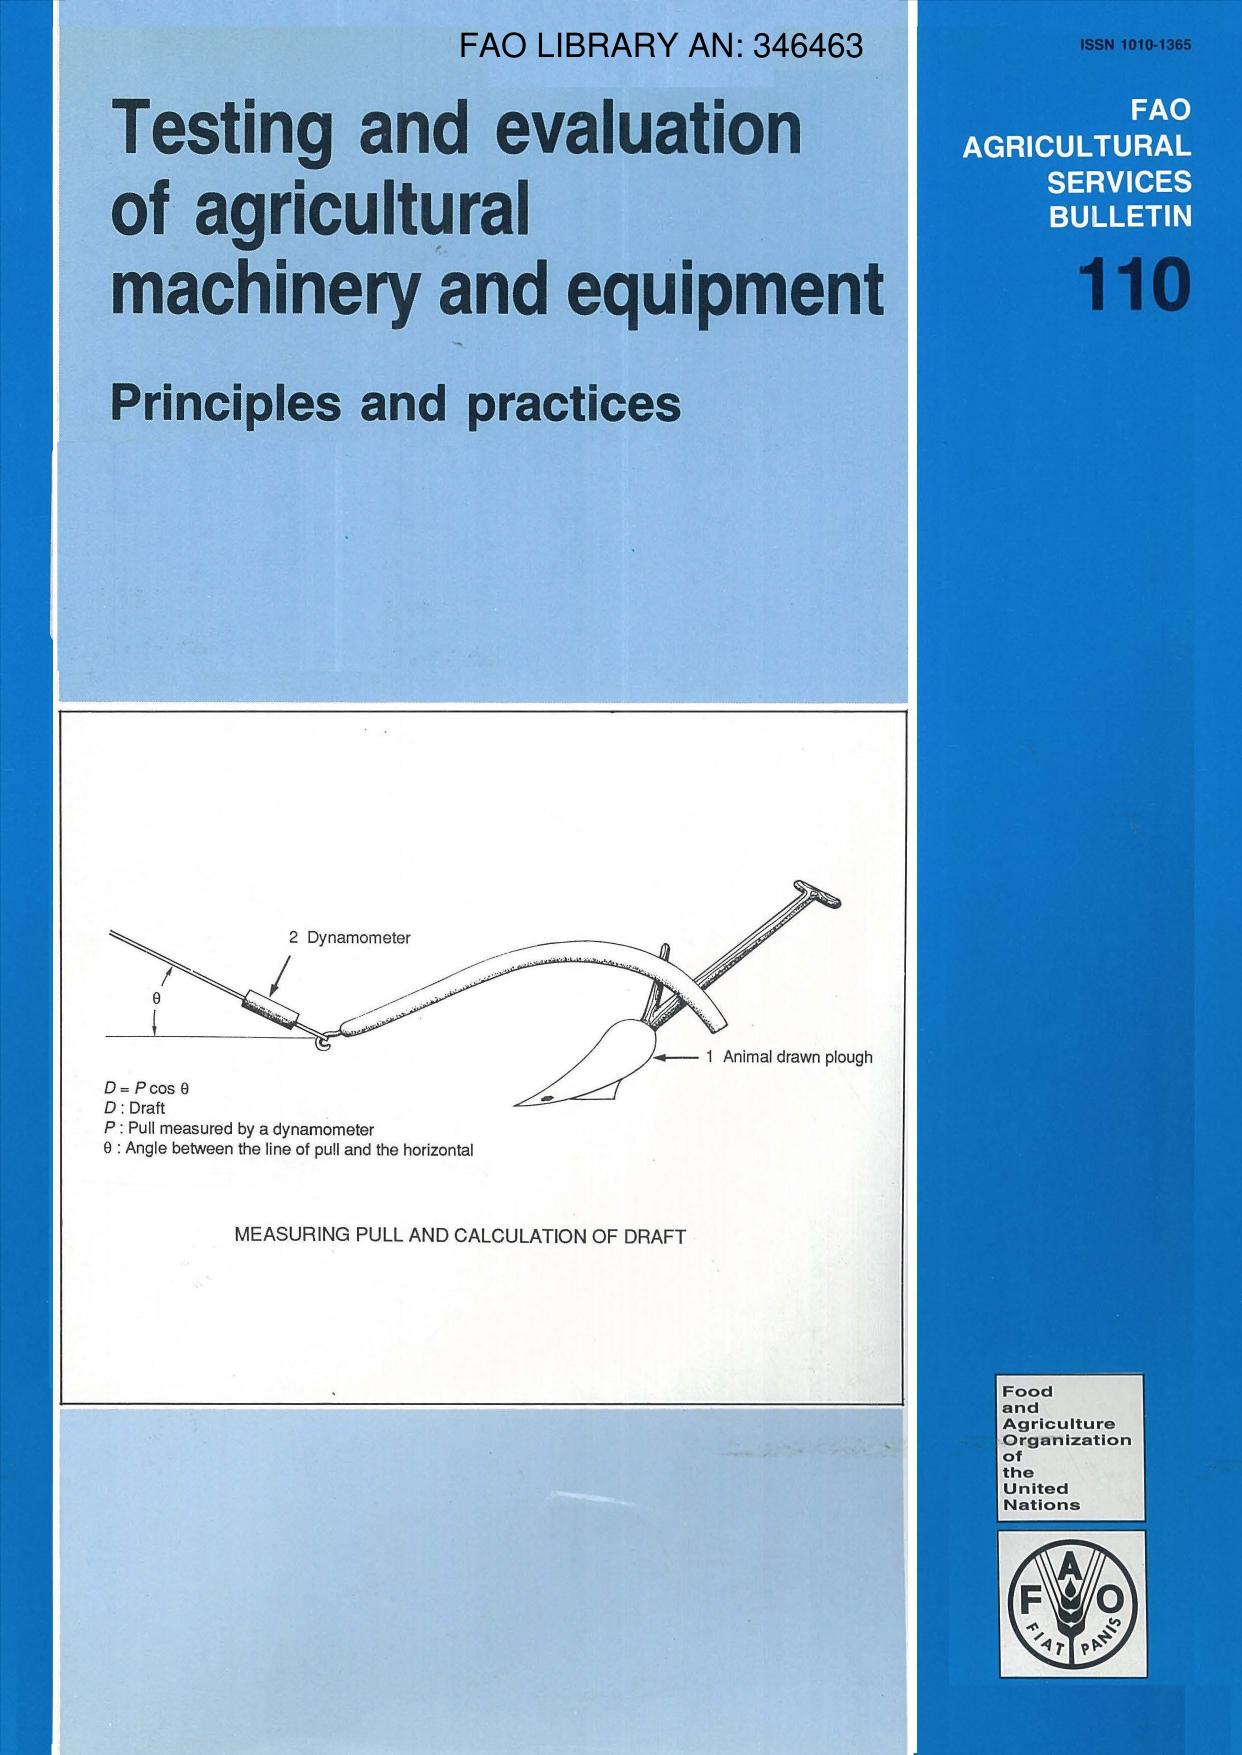 Testing and Evaluation of Agricultural Machinery and Equipment